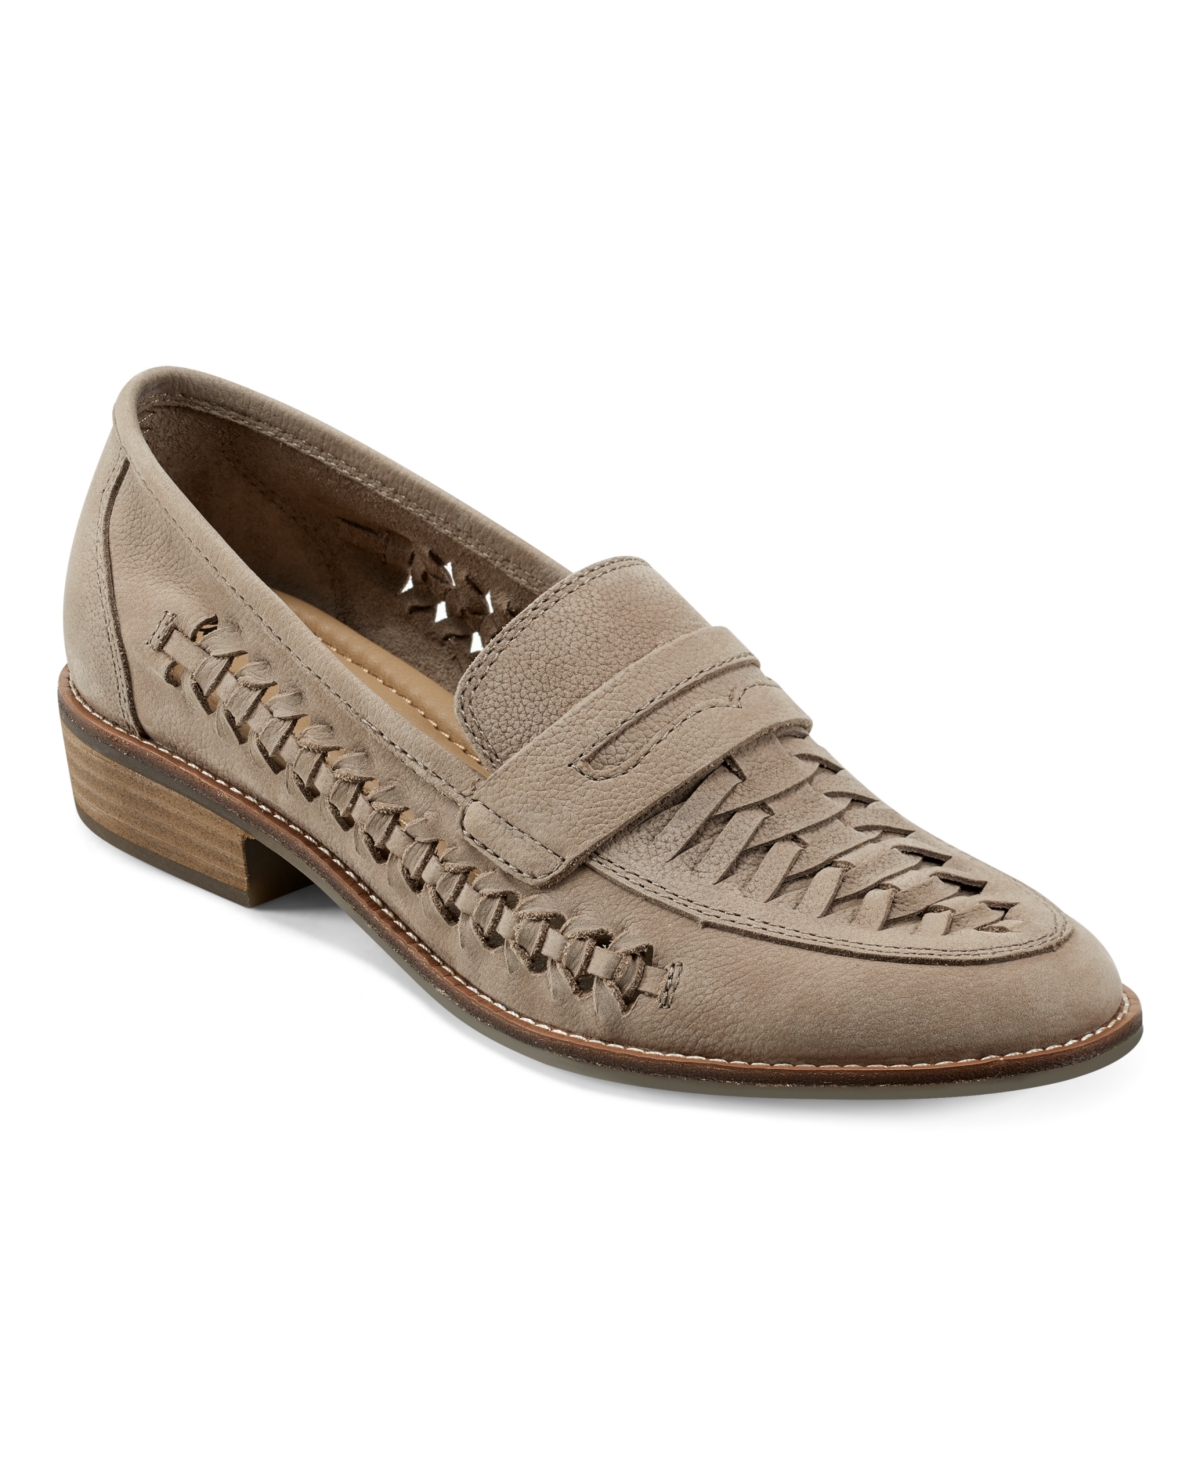 Earth Women's Ella Round Toe Slip-on Casual Flat Loafers In Taupe Nubuck